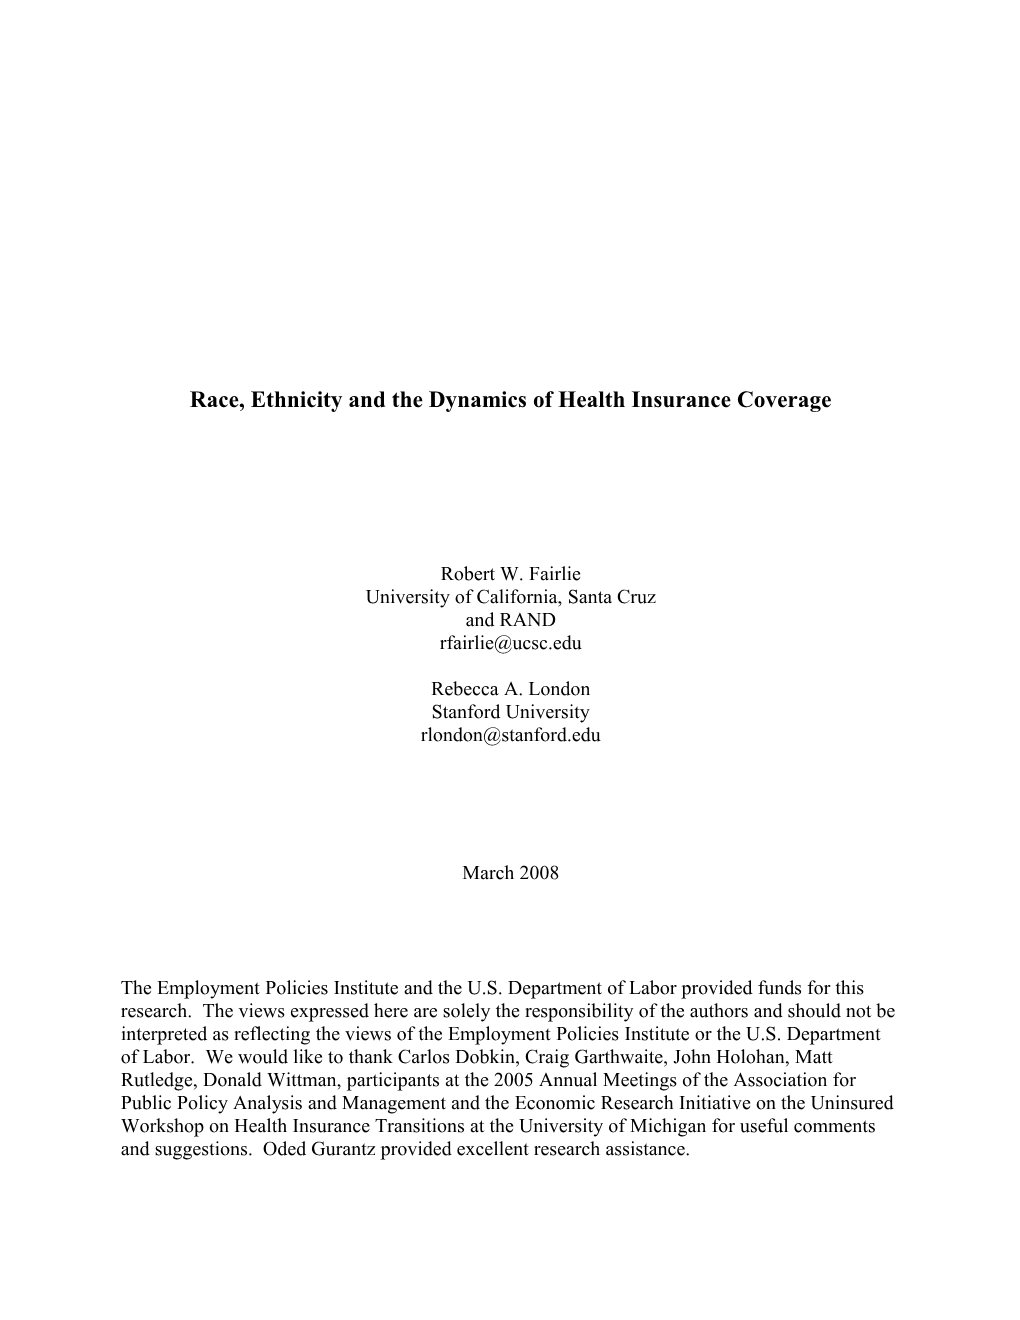 An Analysis of the Dynamics of Health Insurance Coverage